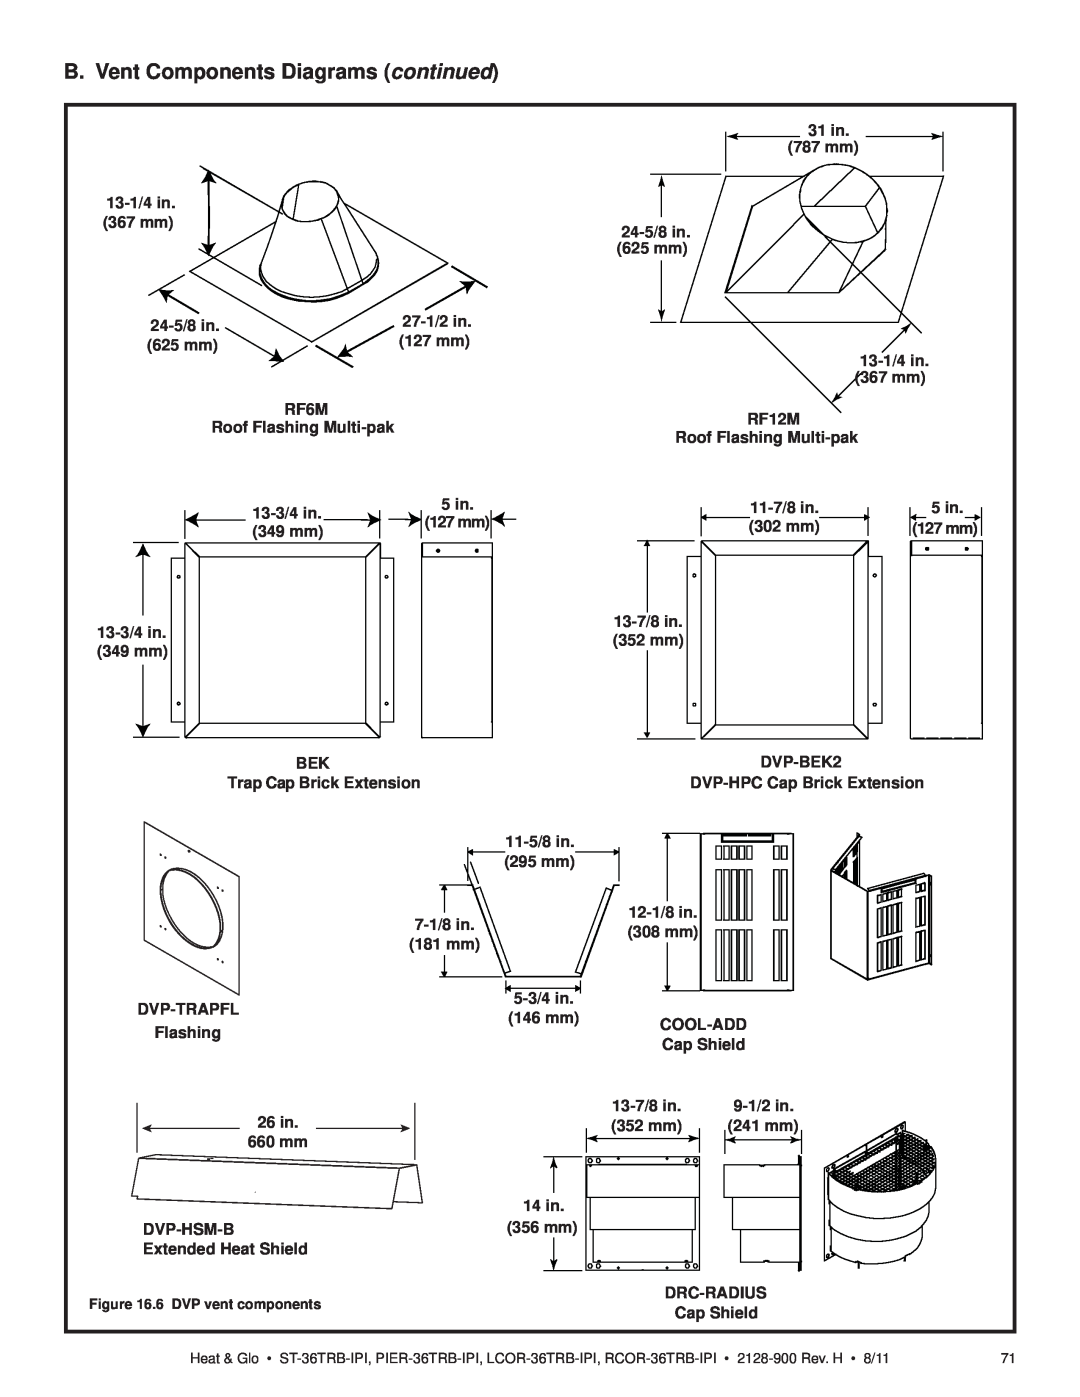 Heat & Glo LifeStyle ST-36TRB-IPI owner manual B. Vent Components Diagrams continued, 31 in 